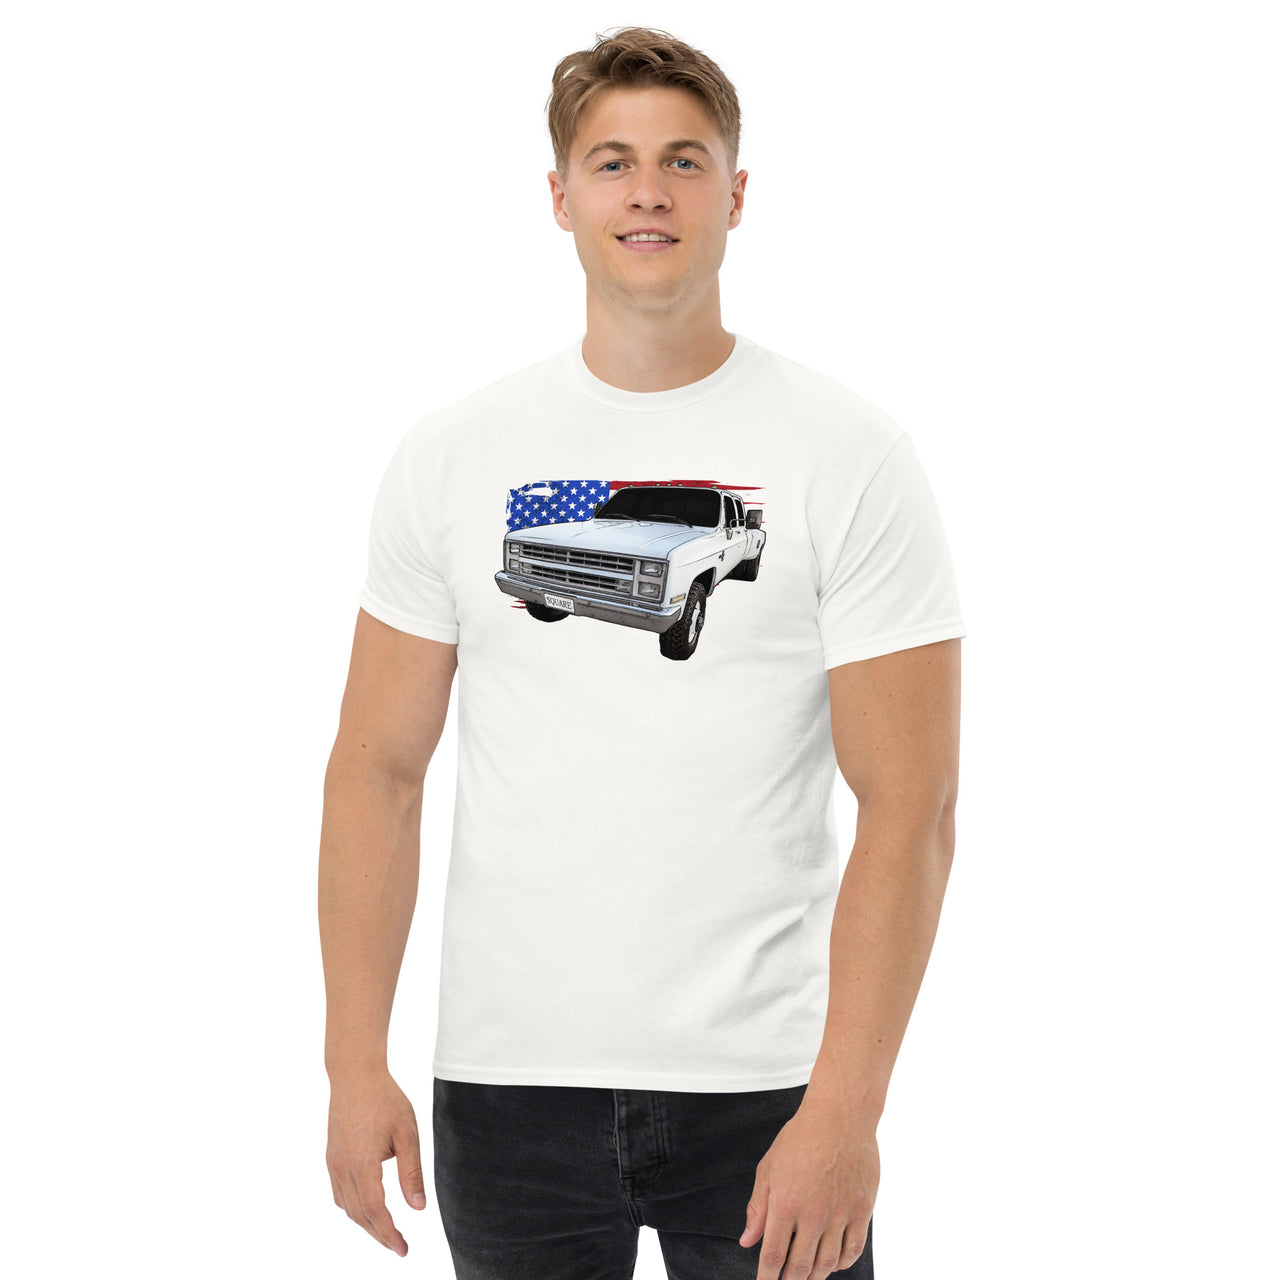 Square Body Dually Crew Cab T-Shirt modeled in white